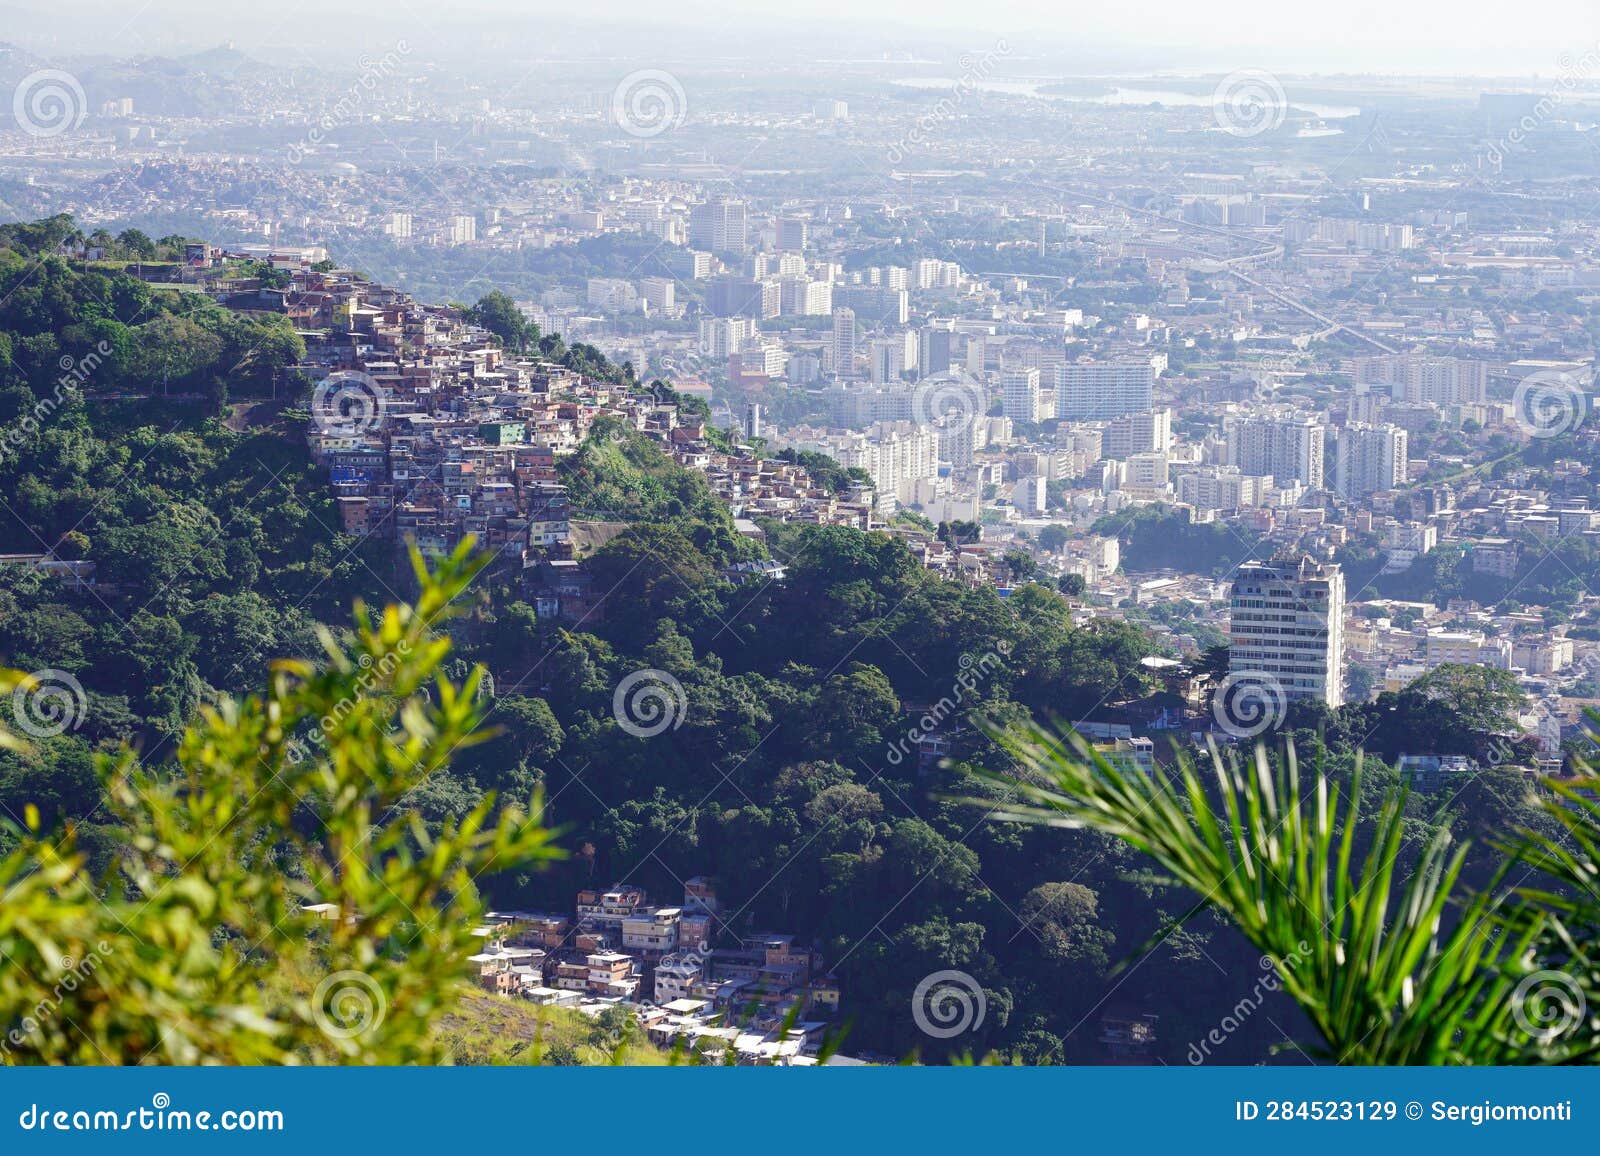 cityscape from mirante dona marta viewpoint with favelas and tijuca forest, rio de janeiro, brazil